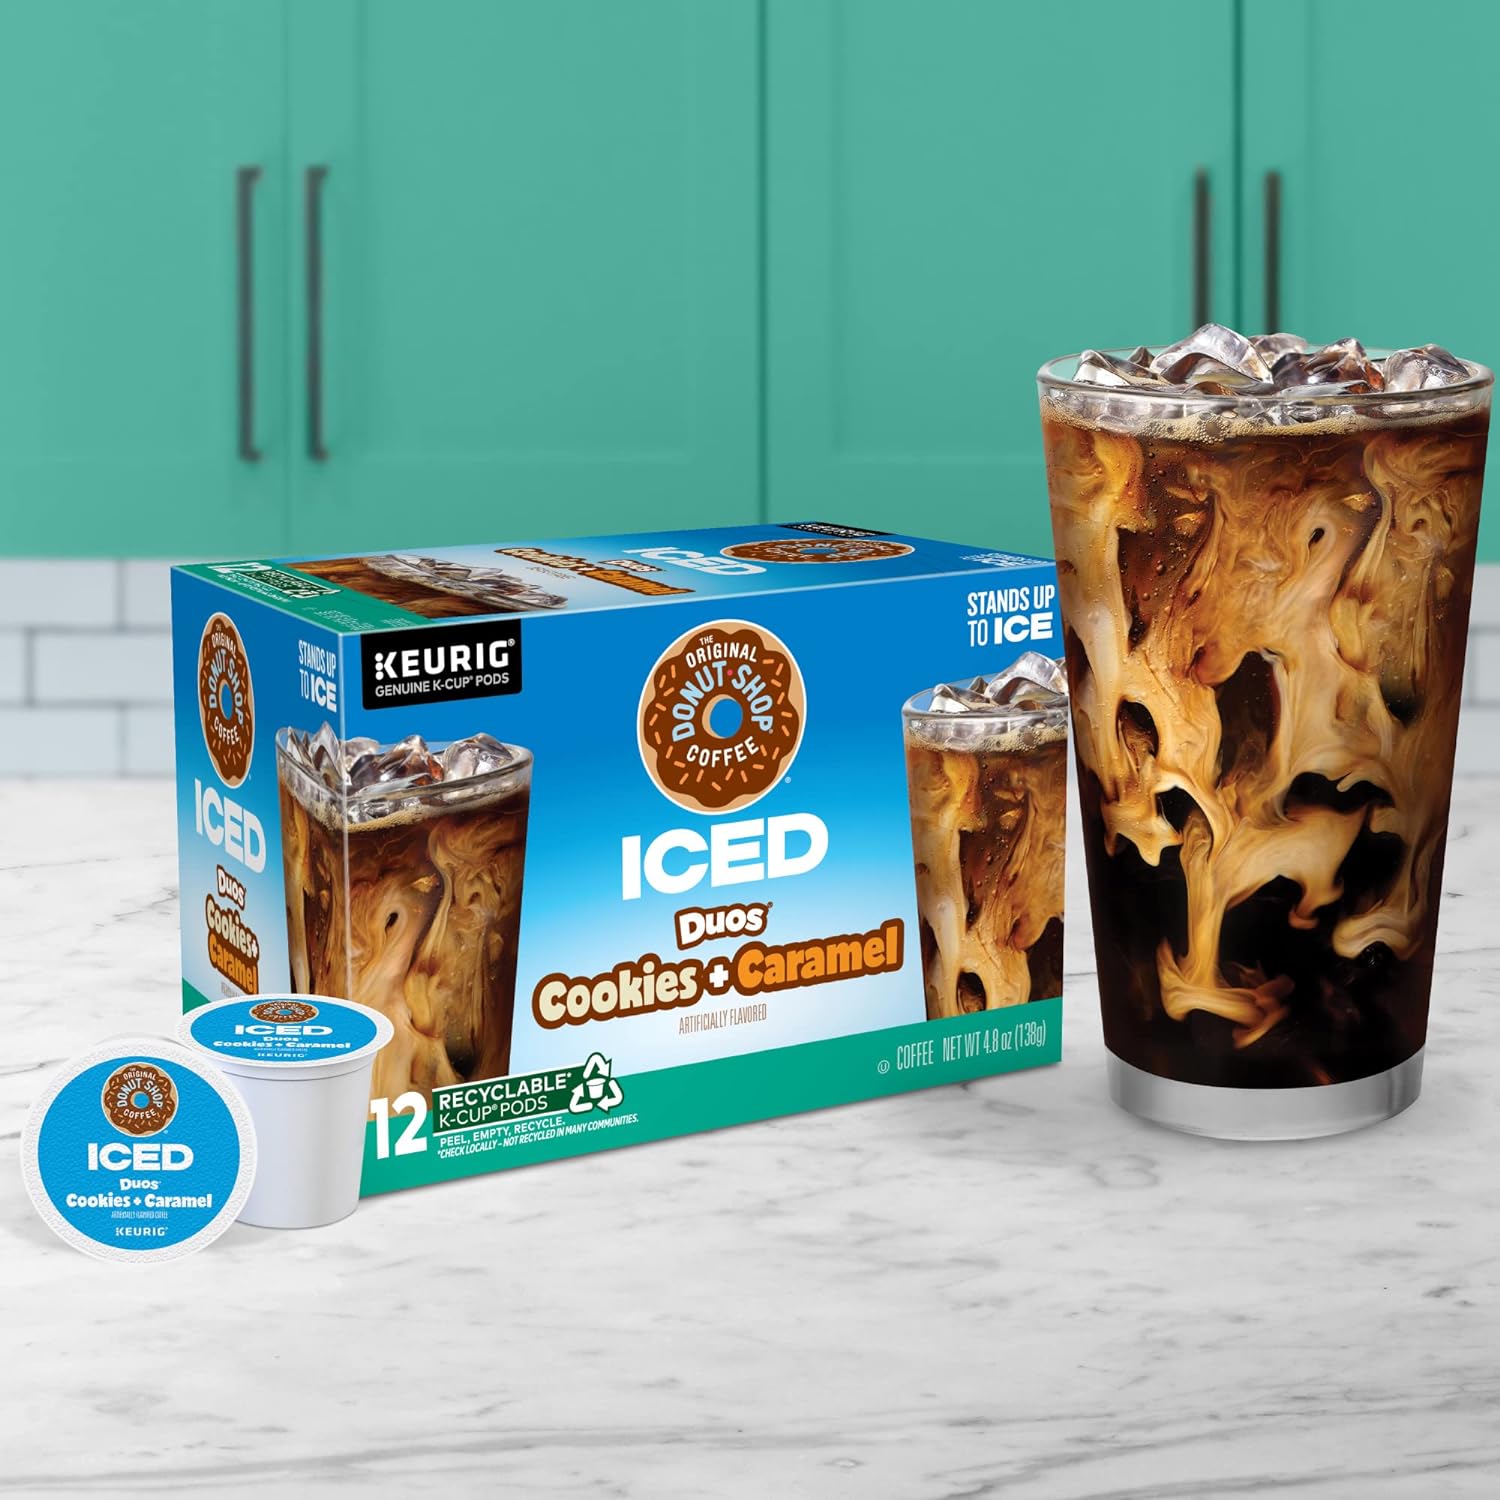 The Original Donut Shop ICED Duos Cookies + Caramel Coffee, Keurig Single Serve K-Cup Pods, 72 Count (6 Packs of 12)